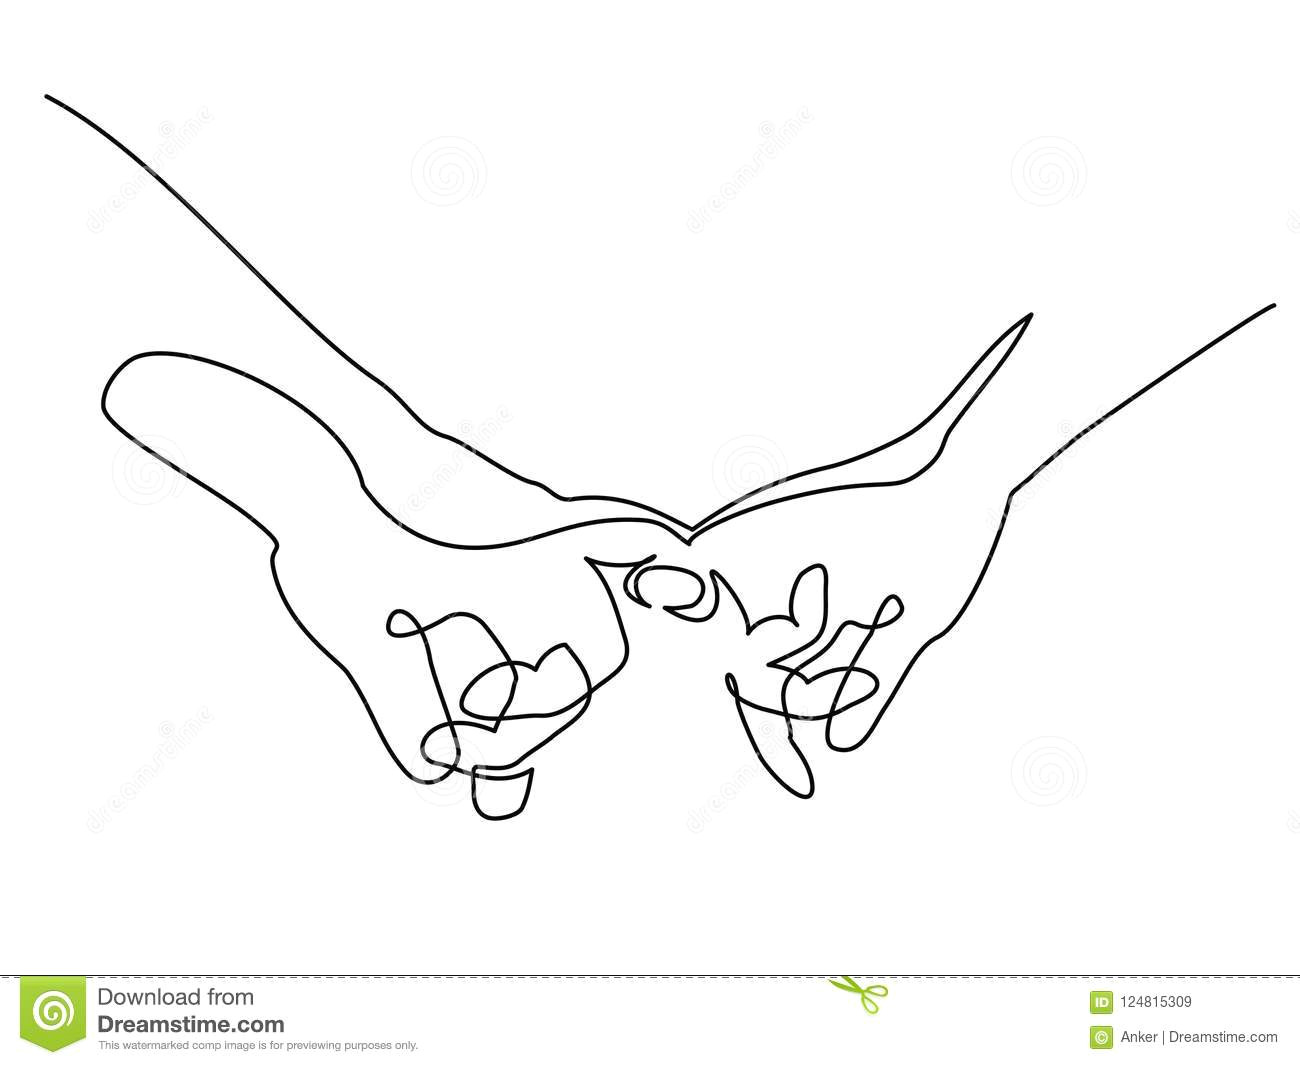 Drawings Of Hands together Hands Woman and Man Holding together with Fingers Stock Vector